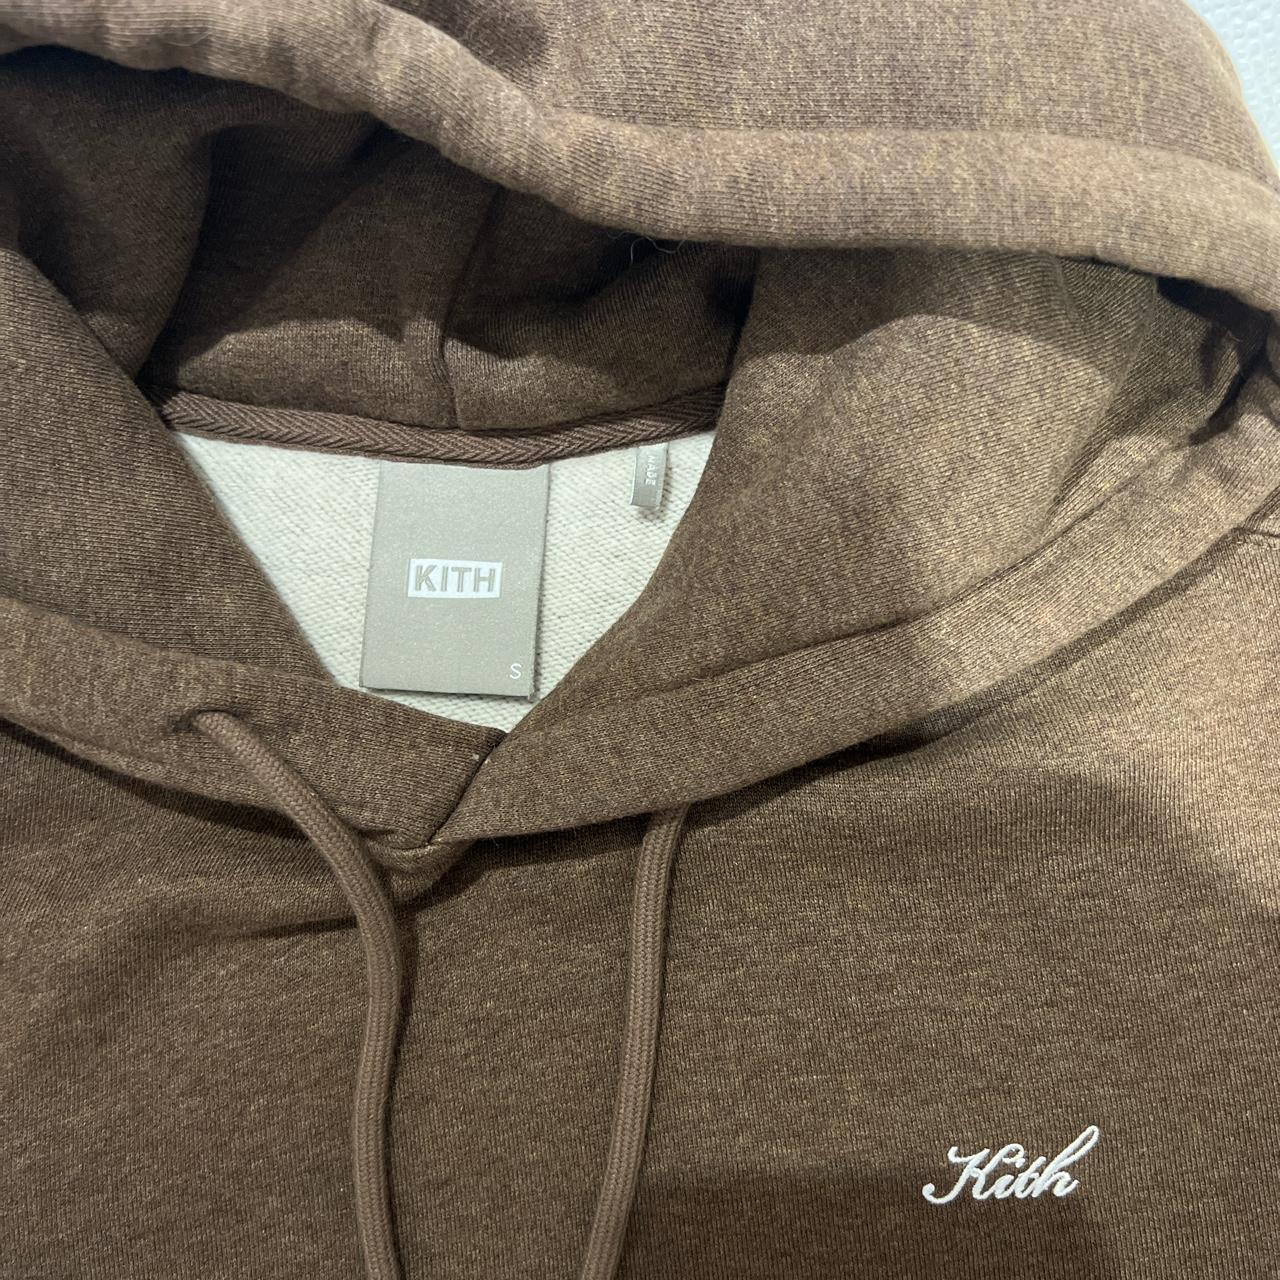 Kith Hoodie in brown Size Small will easily fit an... - Depop